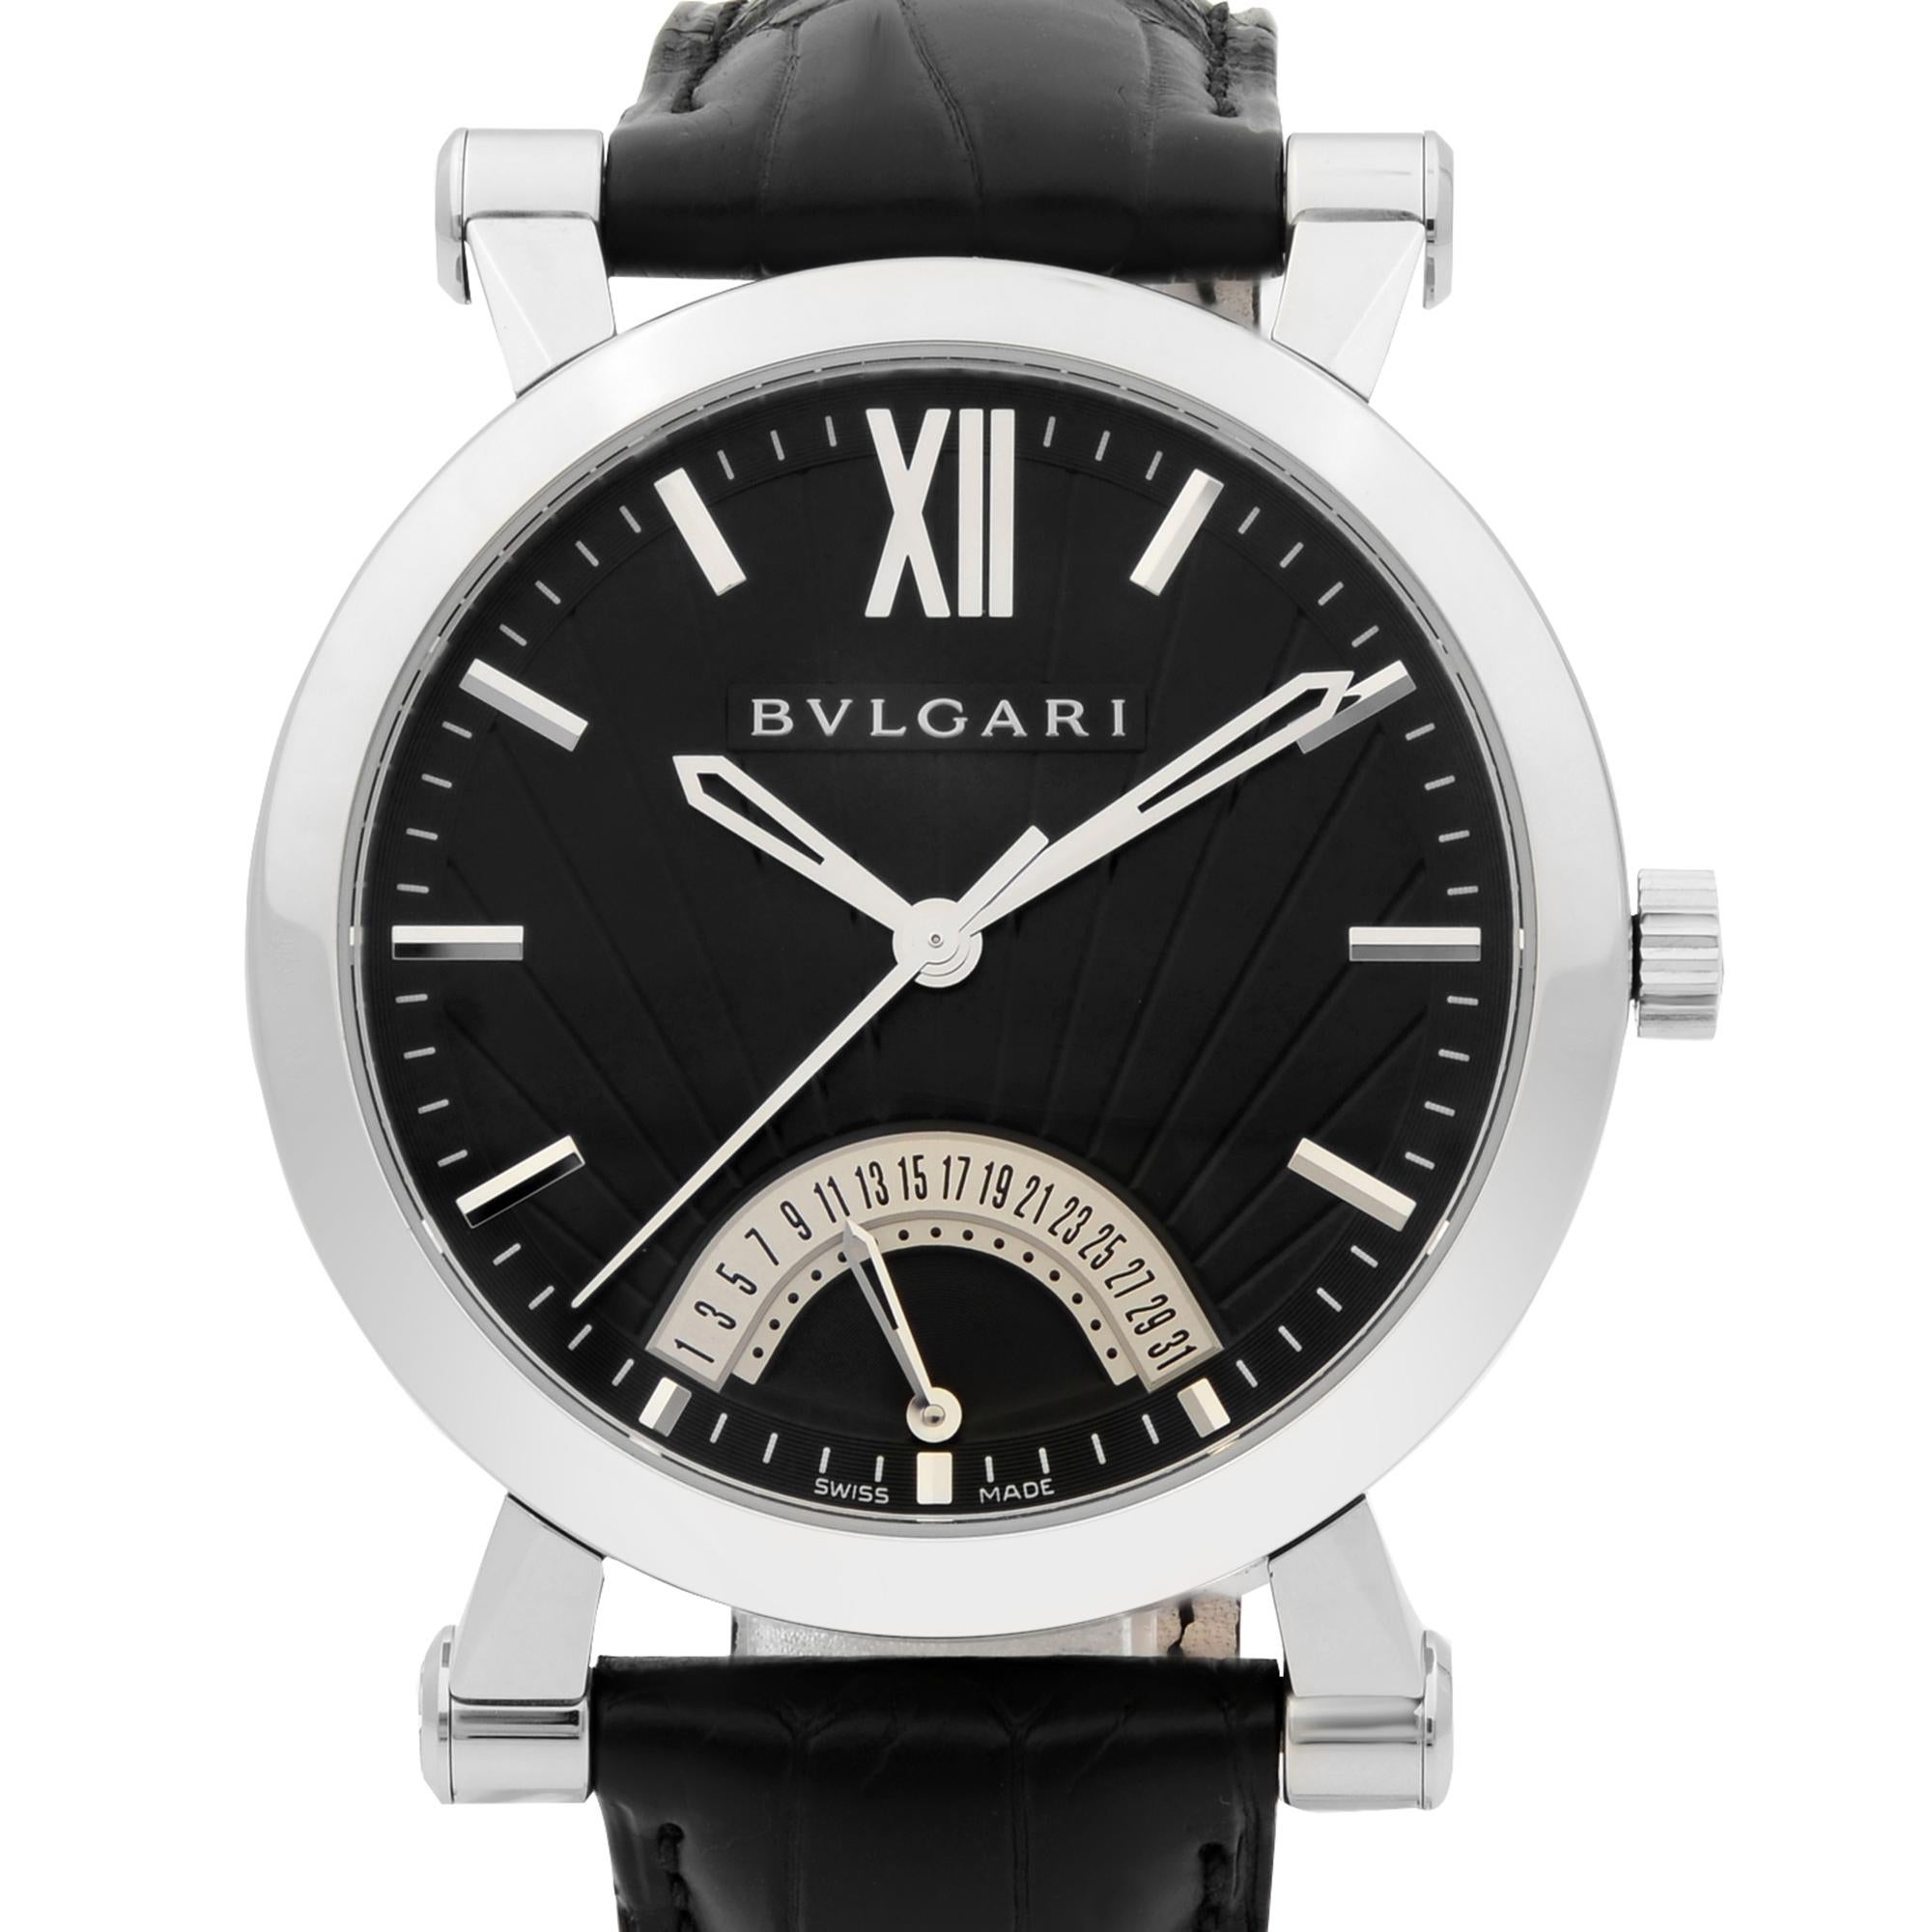 This display model Bvlgari Sotirio Retrograde SB42SDR is a beautiful men's timepiece that is powered by mechanical (automatic) movement which is cased in a stainless steel case. It has a round shape face, date indicator dial and has hand roman